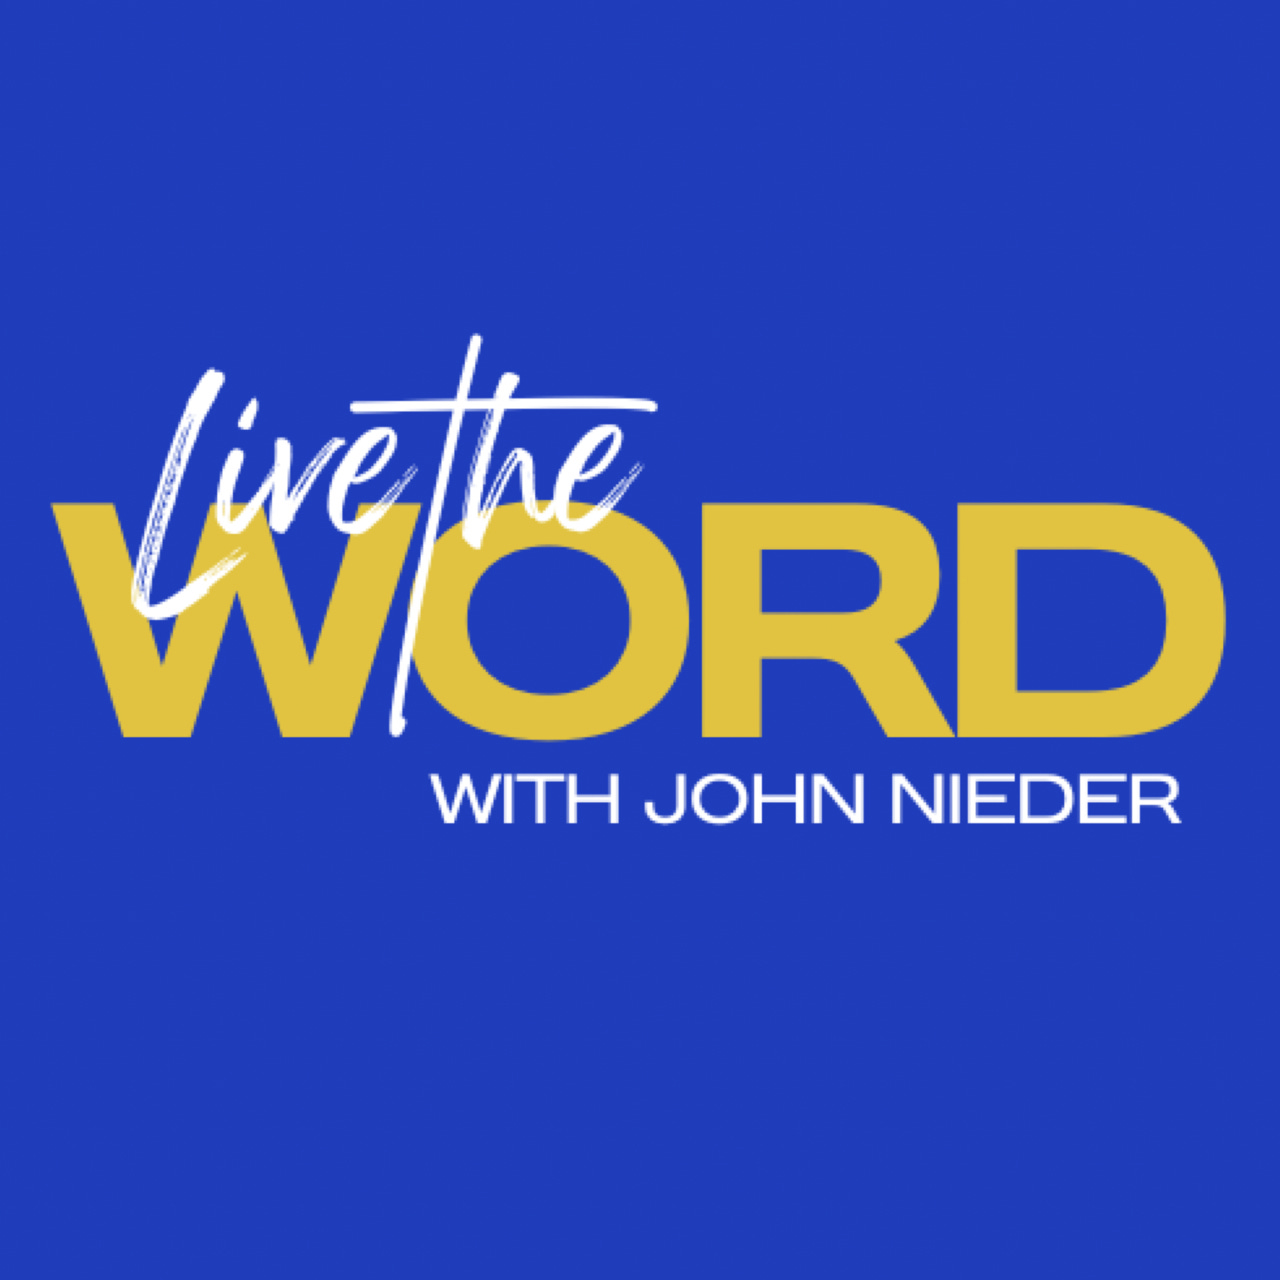 Live the Word with John Nieder